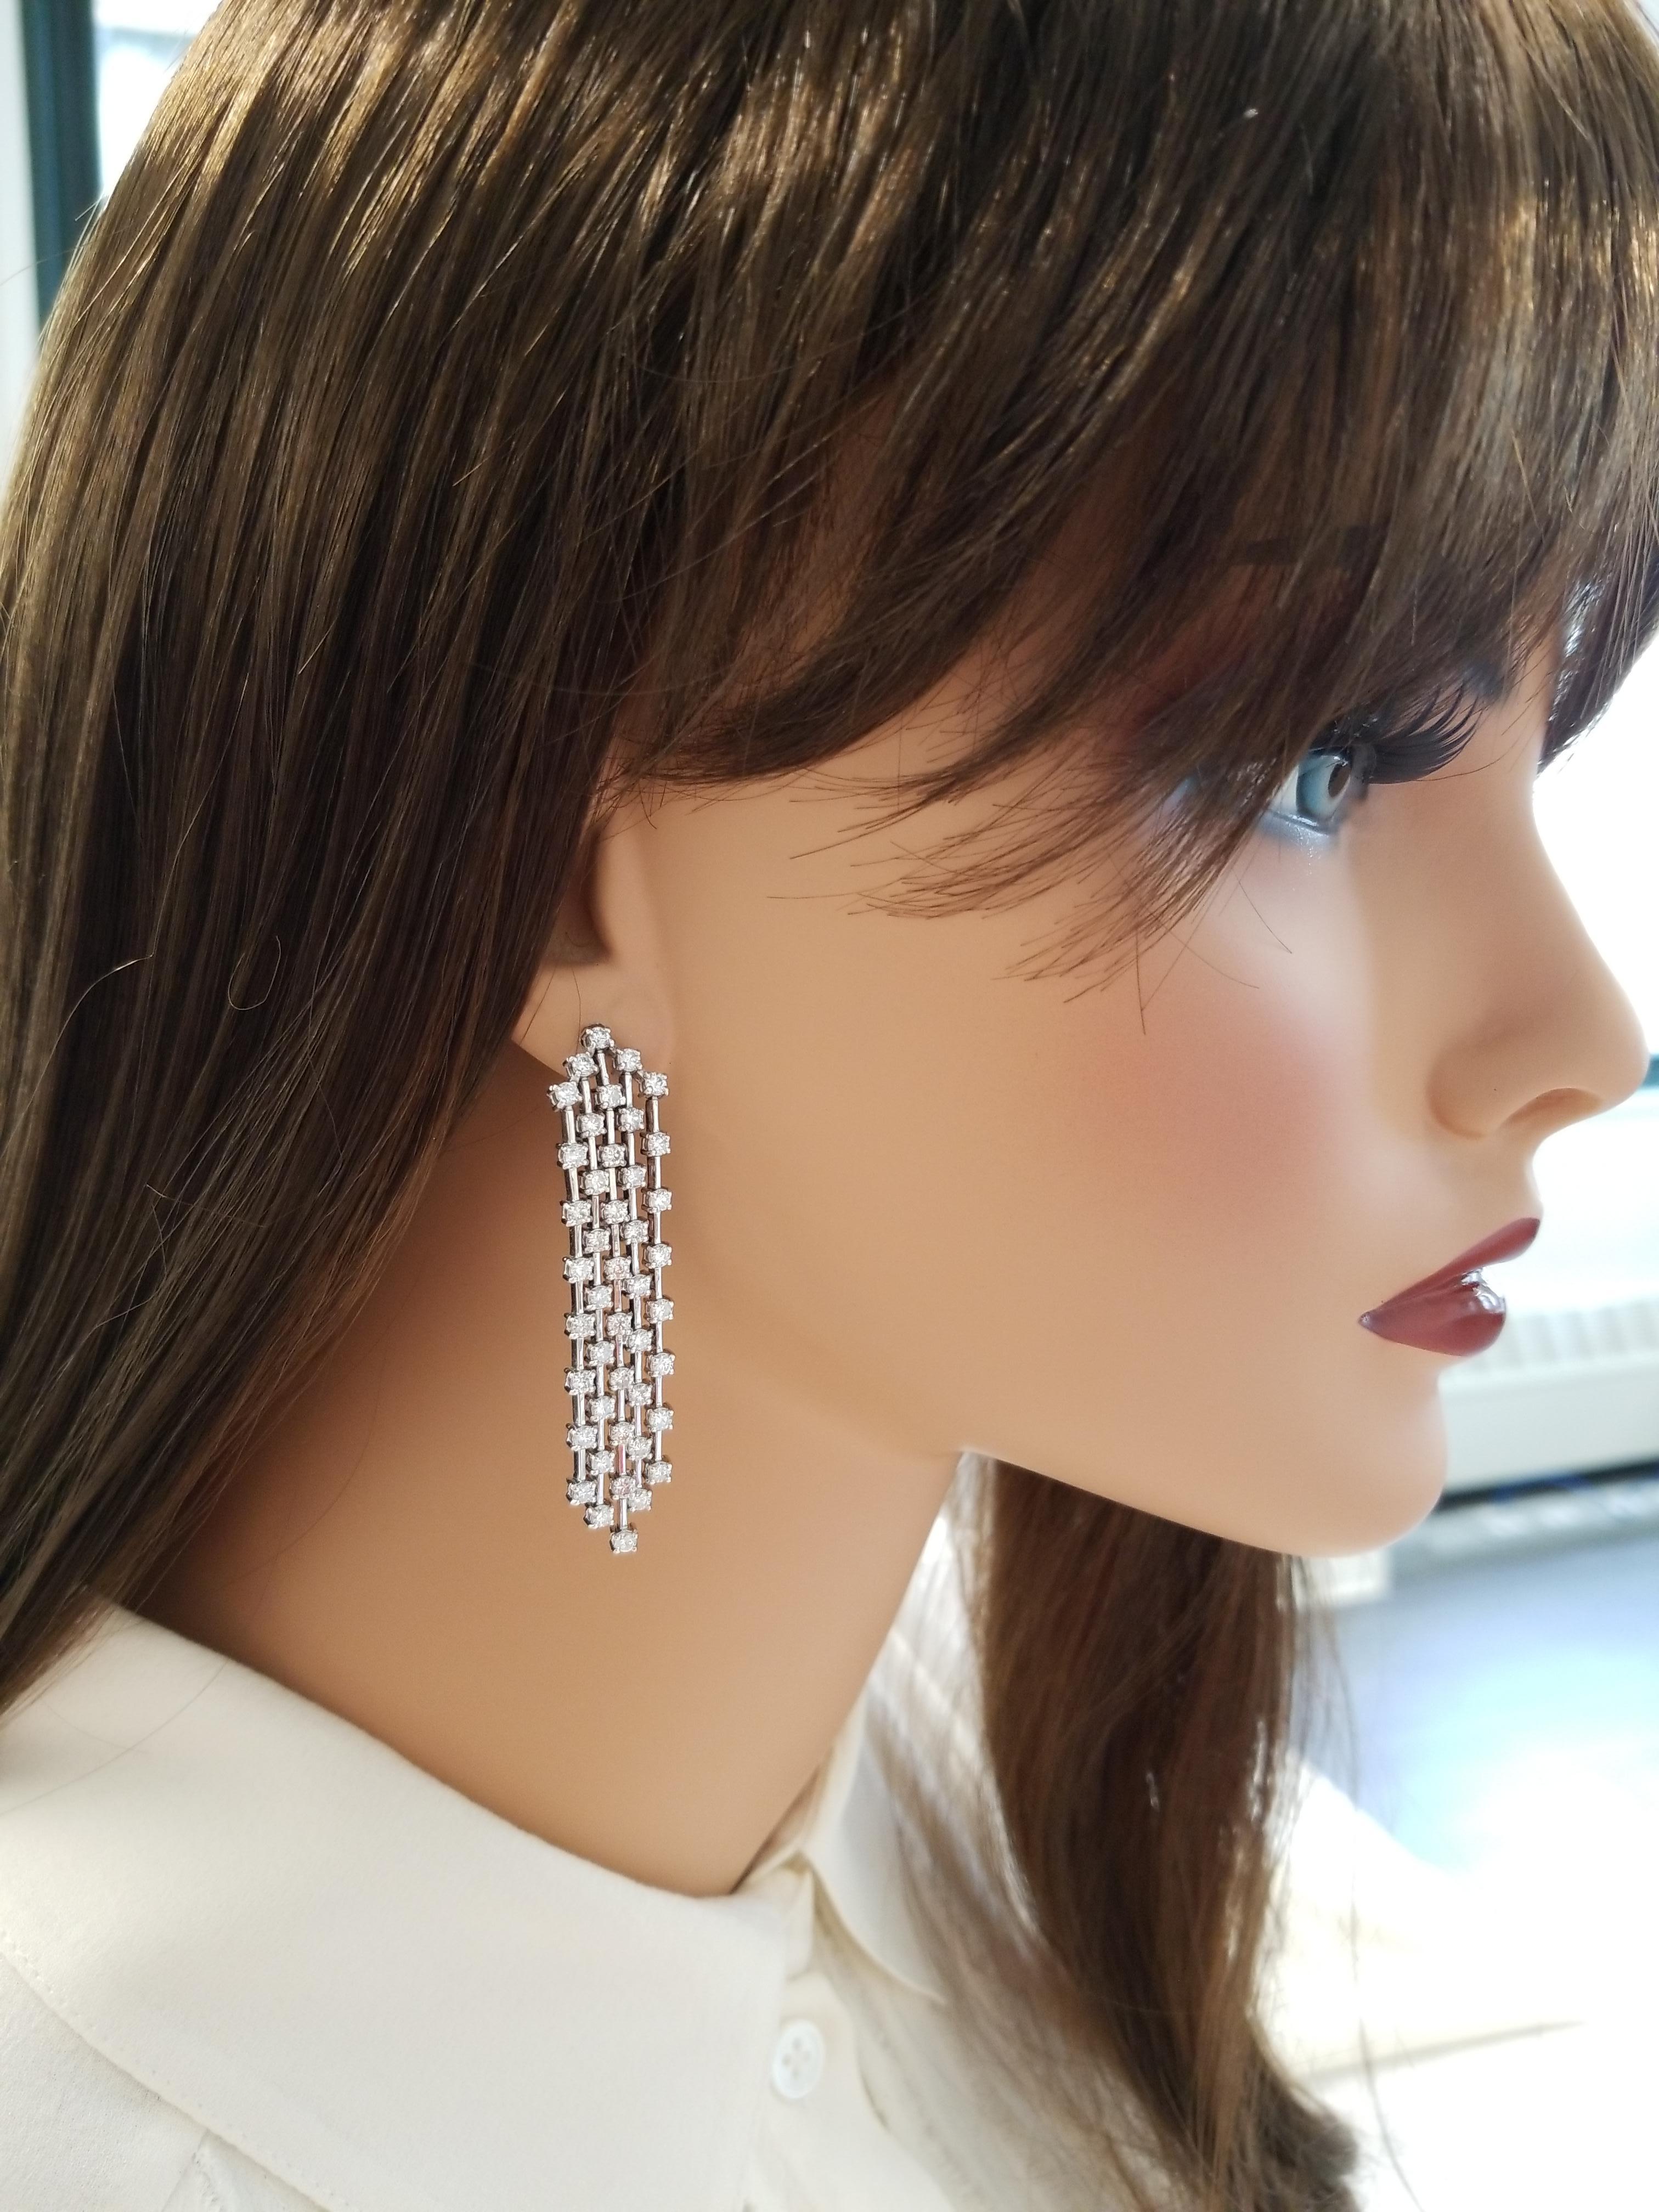 Swinging fringes of 88 round diamonds, prong set, adorn these dramatic dangling earrings with a total weight of 4.20 carats. Designed in brightly polished 14 K white gold, these stunning earrings are made with semi-stiff linear links that resemble a